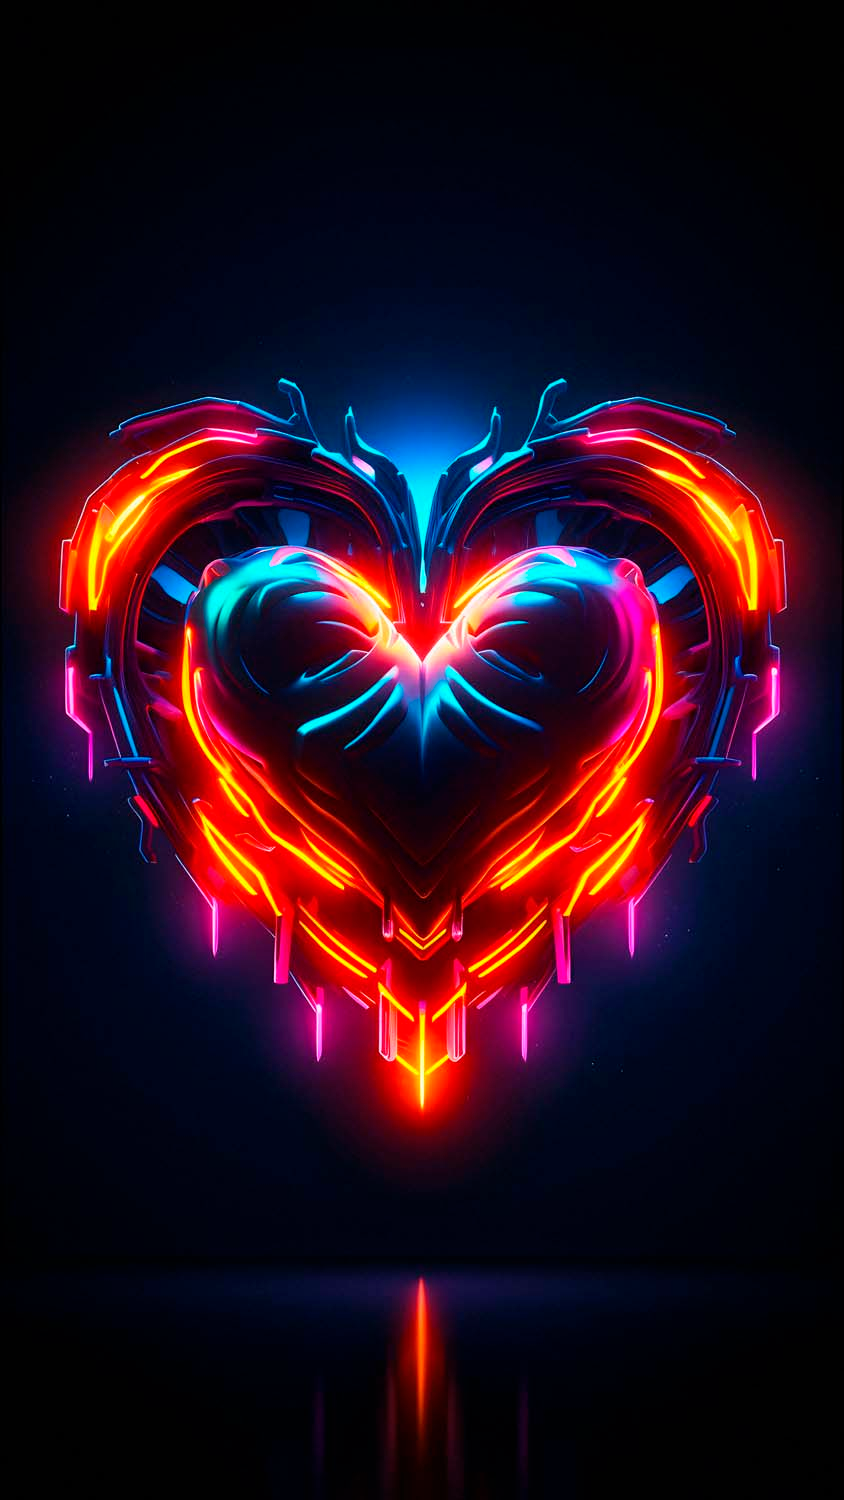 17200 Neon Hearts Stock Photos Pictures  RoyaltyFree Images  iStock  Neon  hearts background